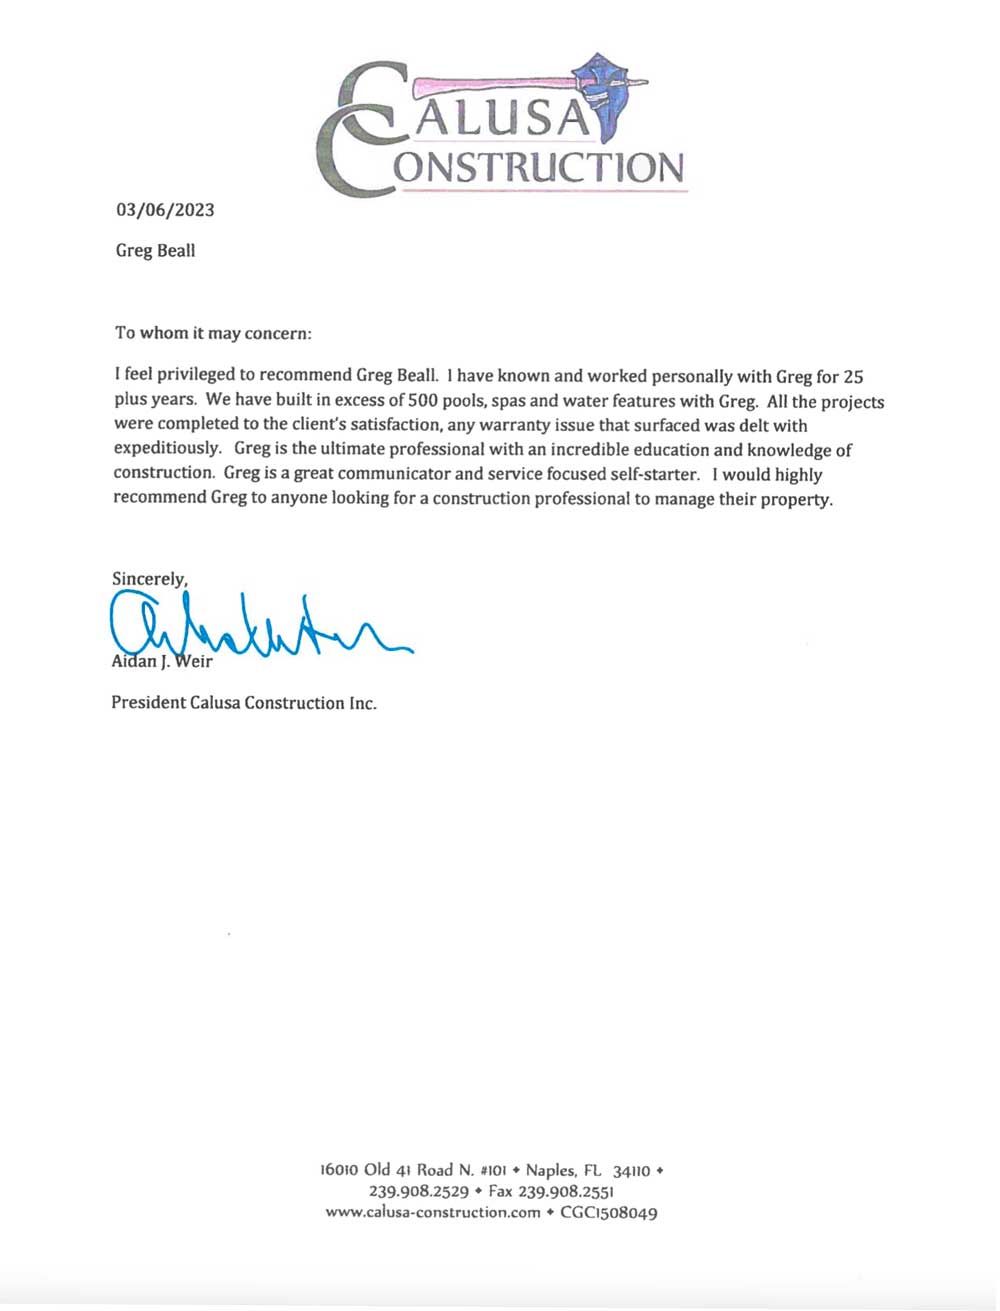 Calusa Construction Letter of Recommendation | Greg Beall Home Watch & Pool Consulting